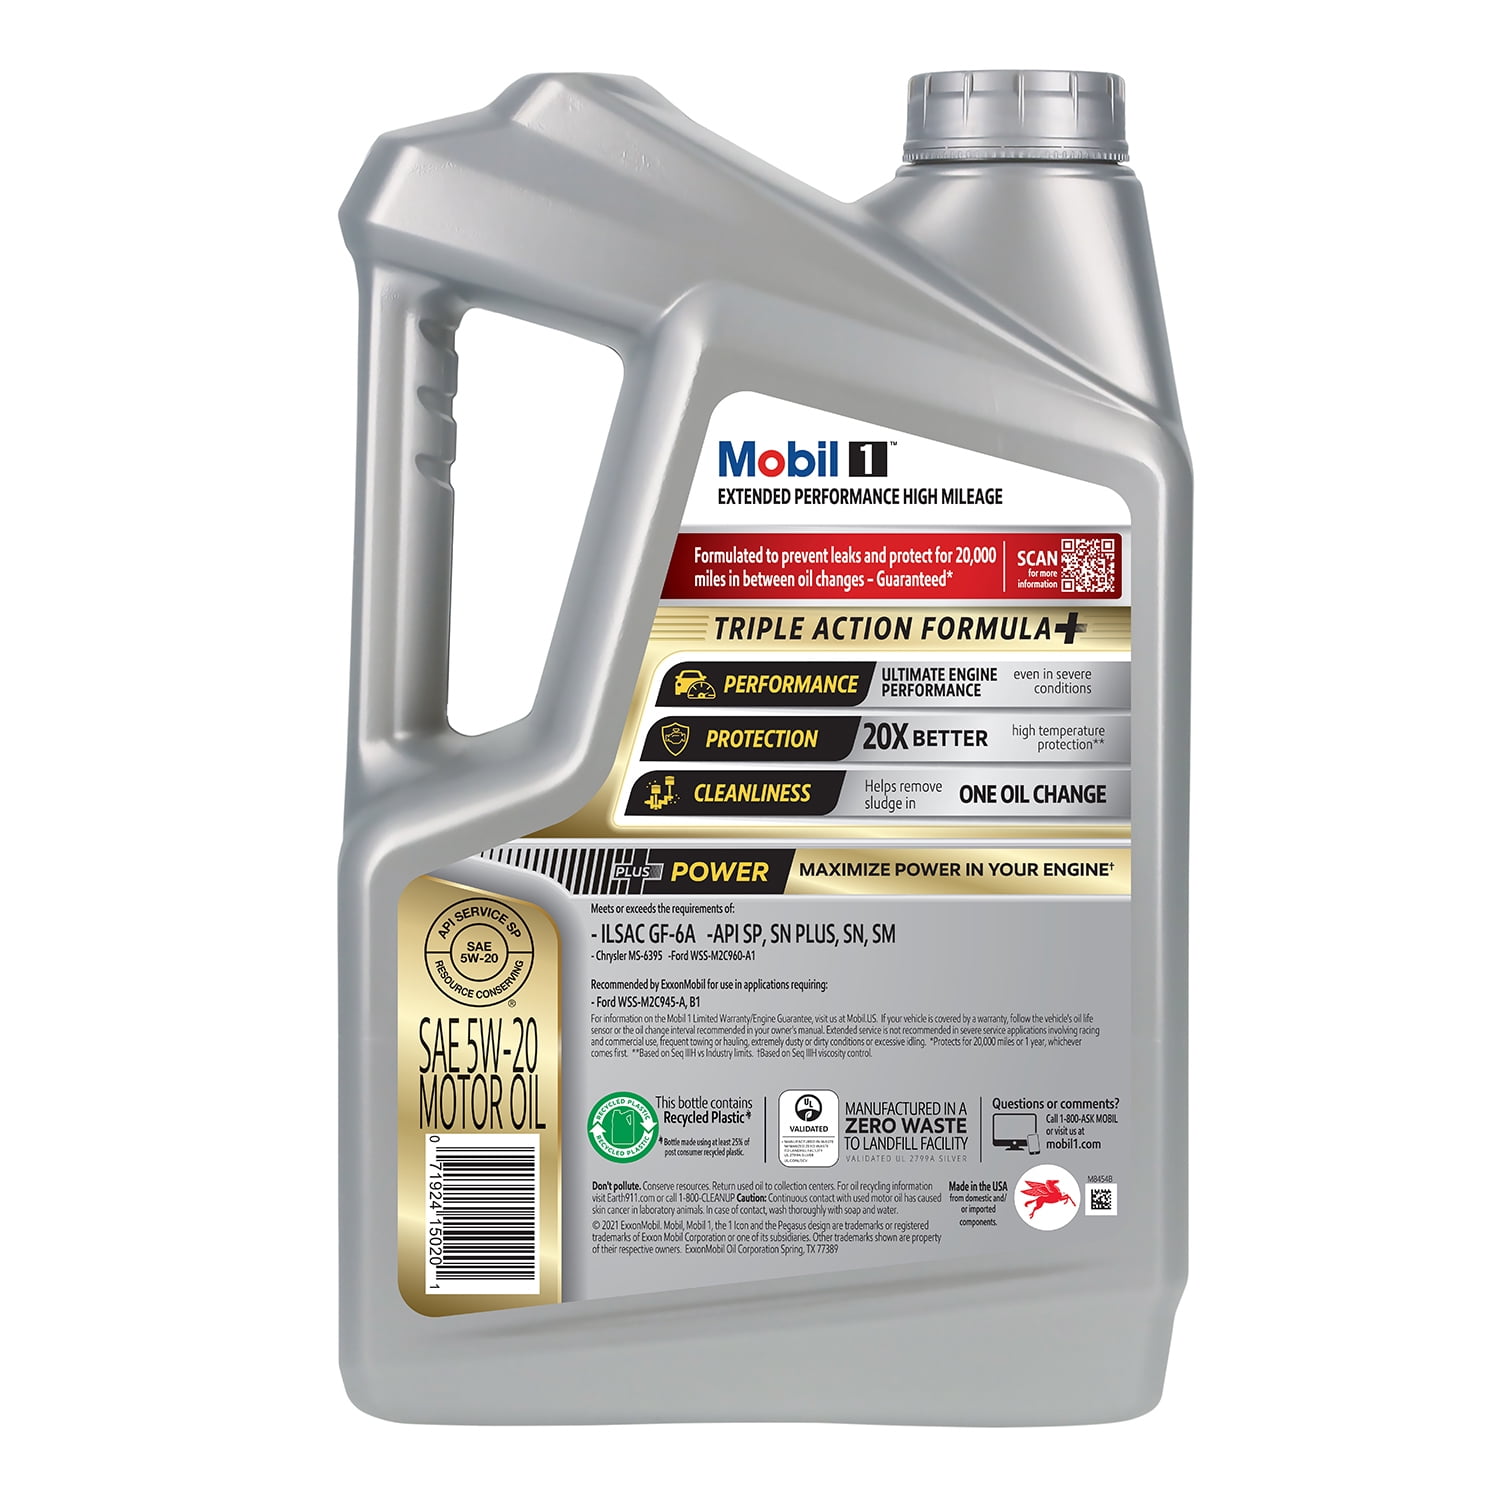 Uplifted Rewind Exchangeable Mobil 1 Extended Performance High Mileage Full Synthetic Motor Oil 5W-20, 5  qt - Walmart.com